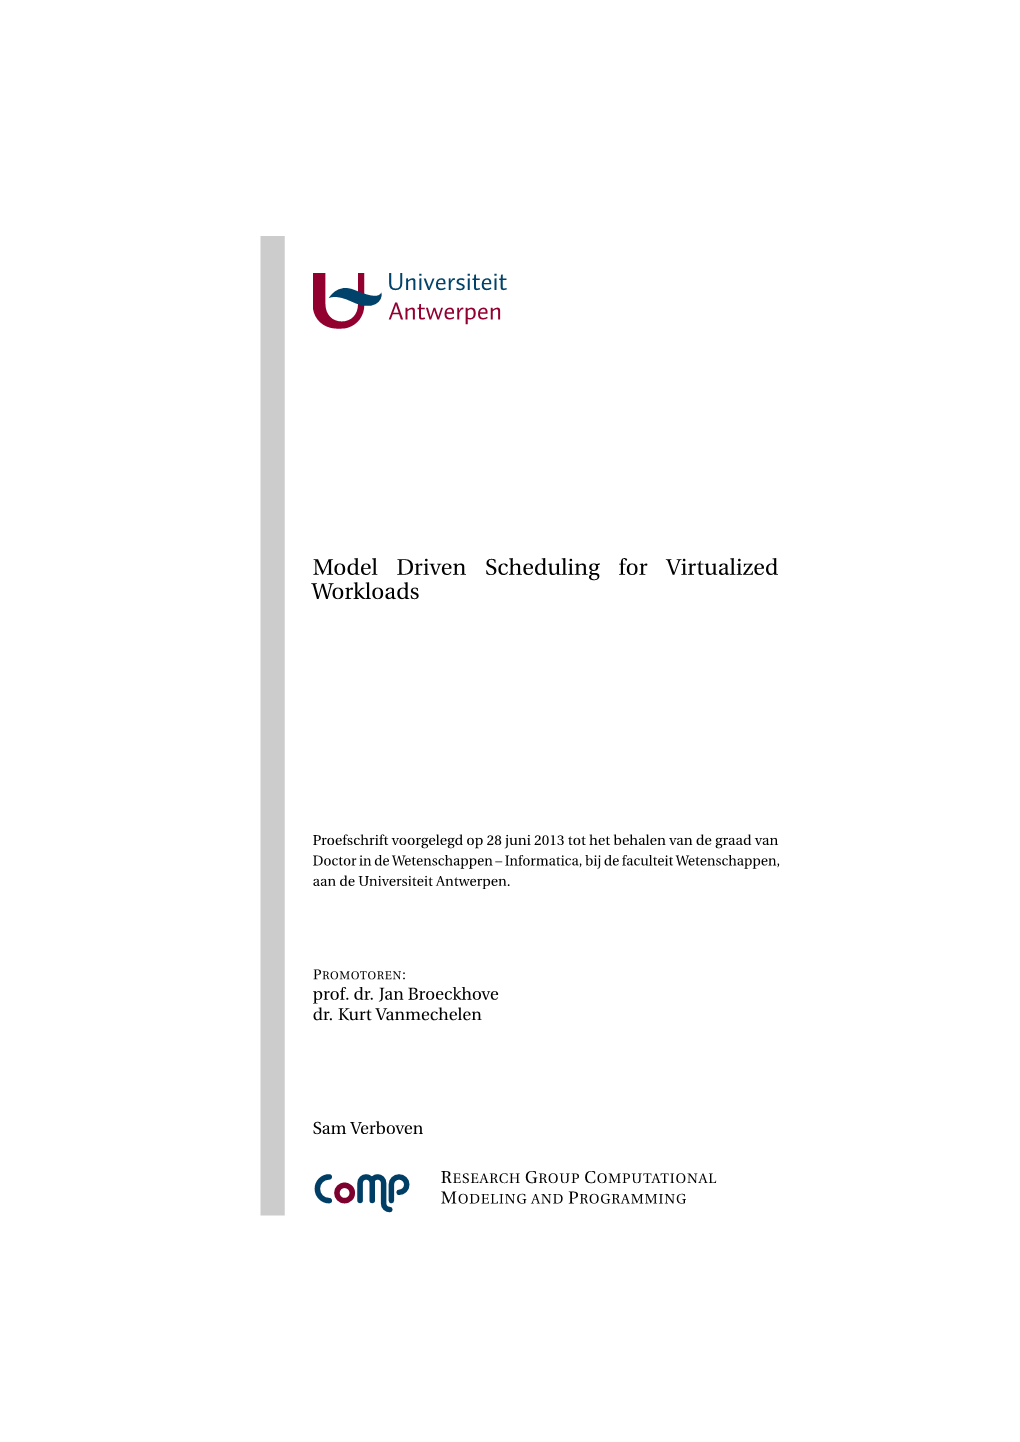 Model Driven Scheduling for Virtualized Workloads